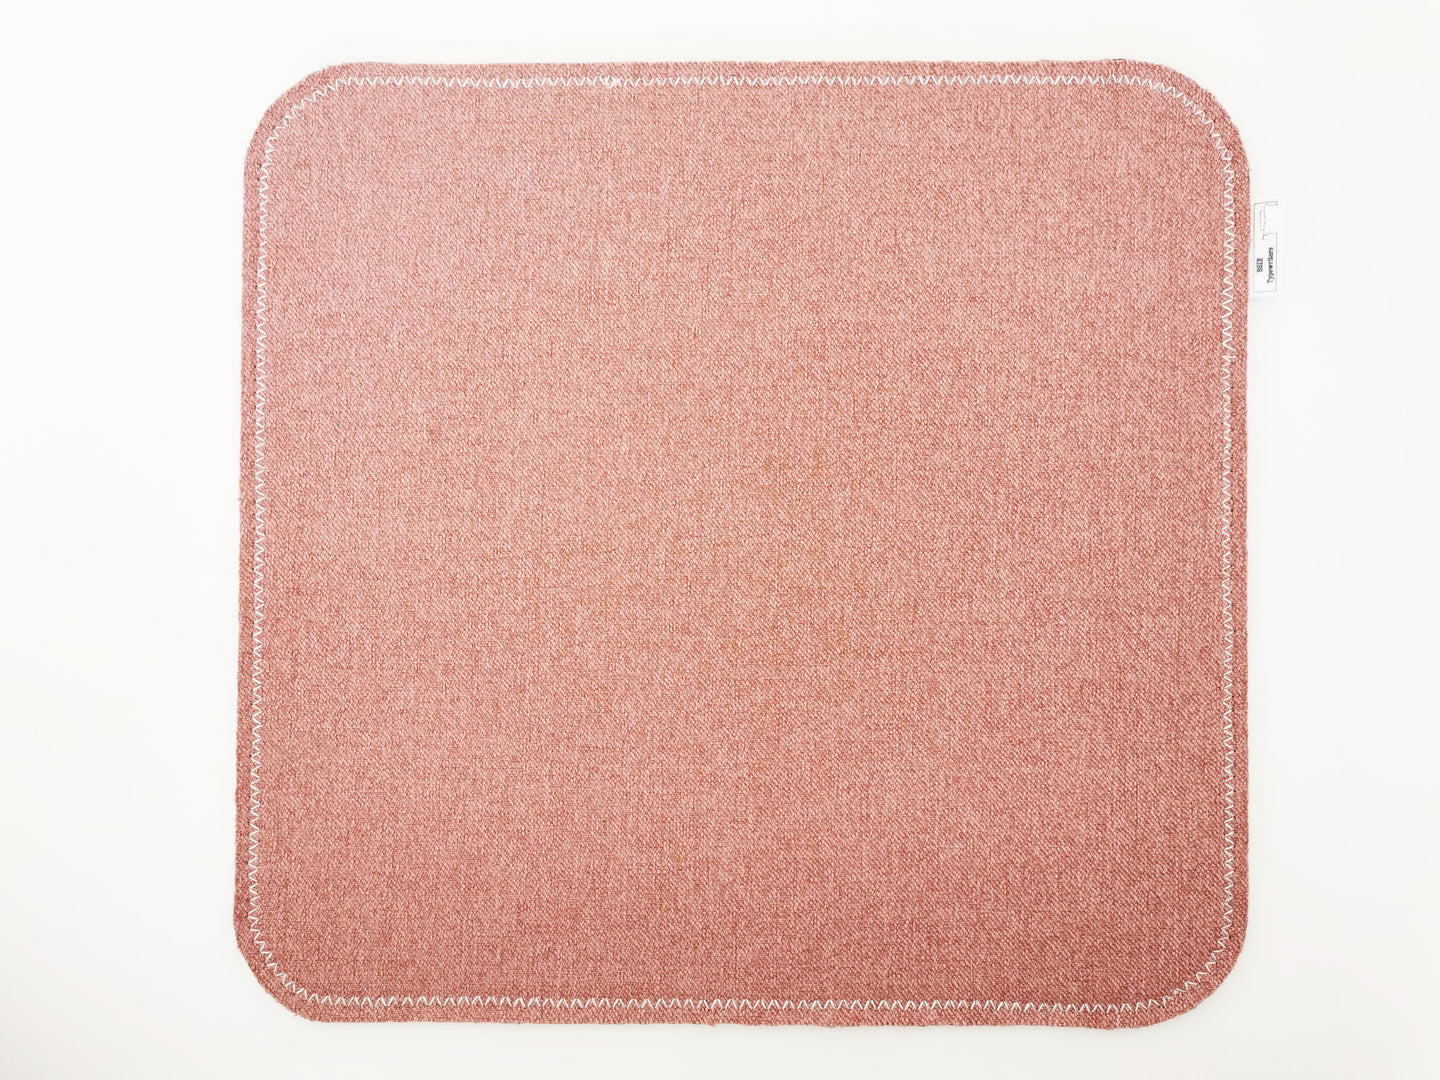 Typewriter Pad - Dampening Sound And Providing a Non-slip surface - Red